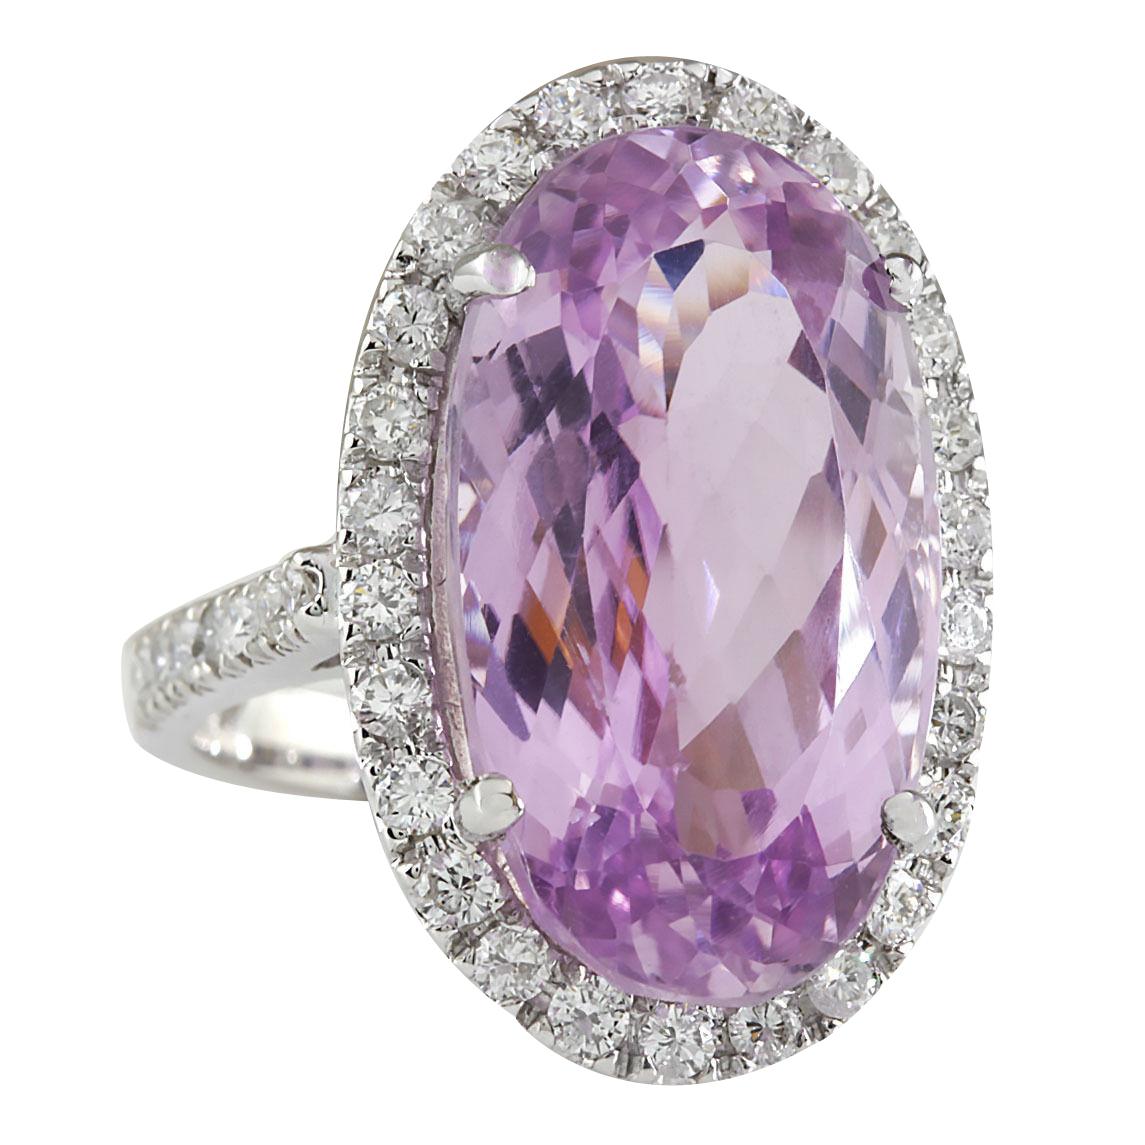 Stamped: 18K White Gold
Total Ring Weight: 9.5 Grams
Ring Length: N/A
Ring Width: N/A
Gemstone Weight: Total Natural Kunzite Weight is 15.40 Carat (Measures: 20.75x11.75 mm)
Color: Pink
Diamond Weight: Total Natural Diamond Weight is 1.00